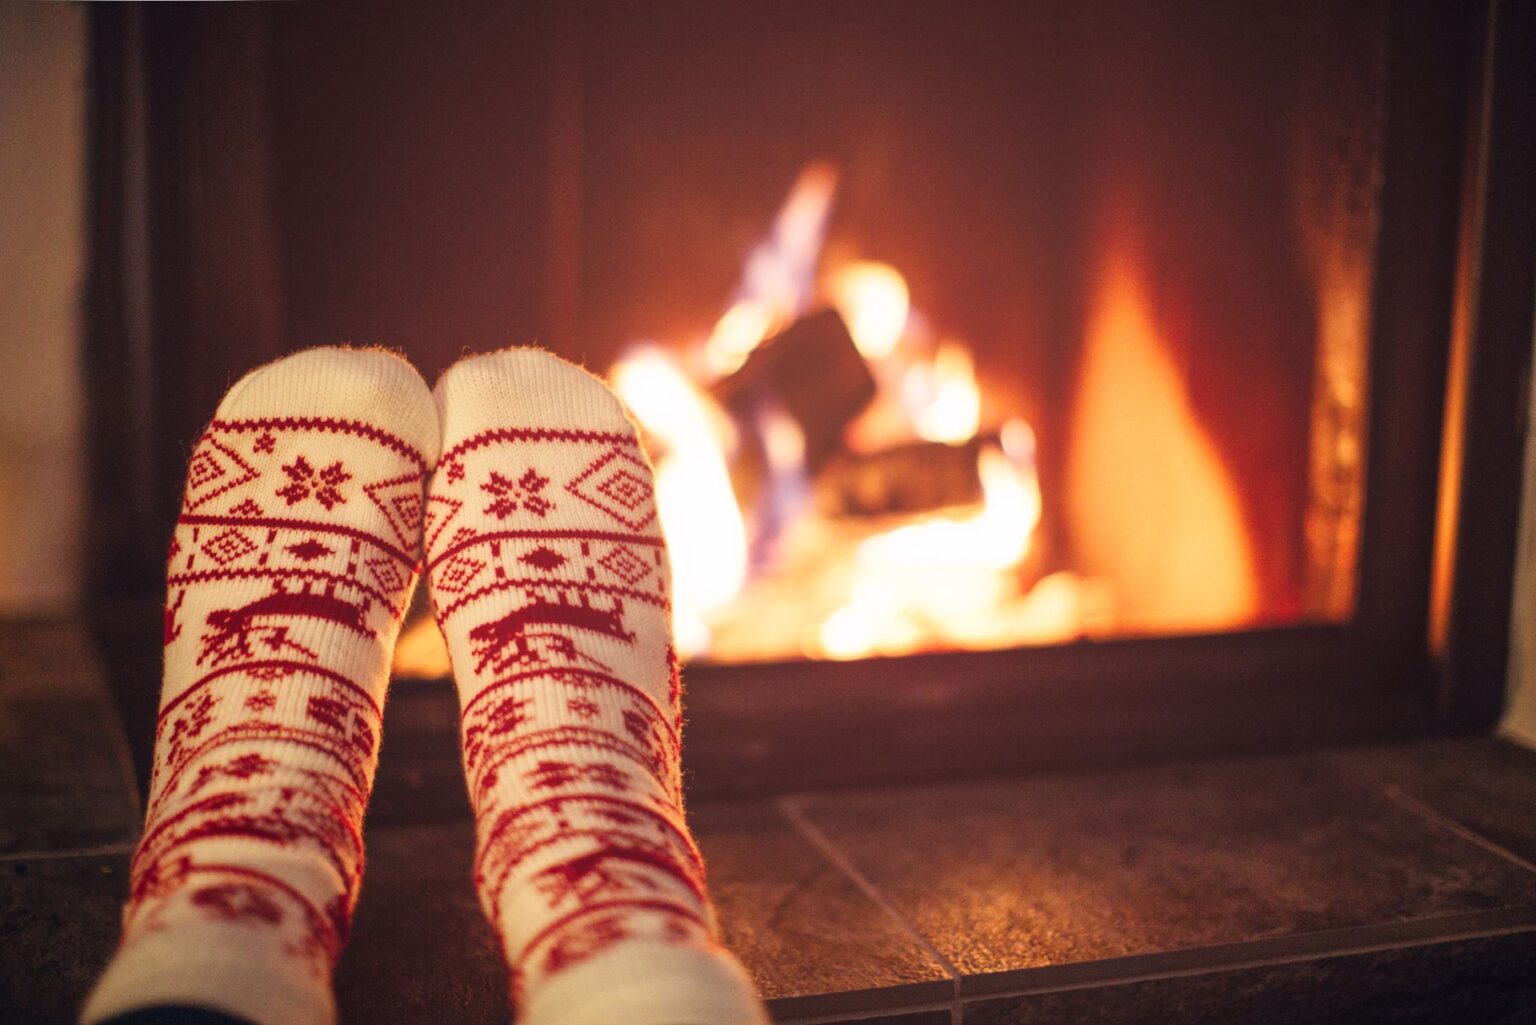 33 Winter Self care Ideas to Be Happy from Mind